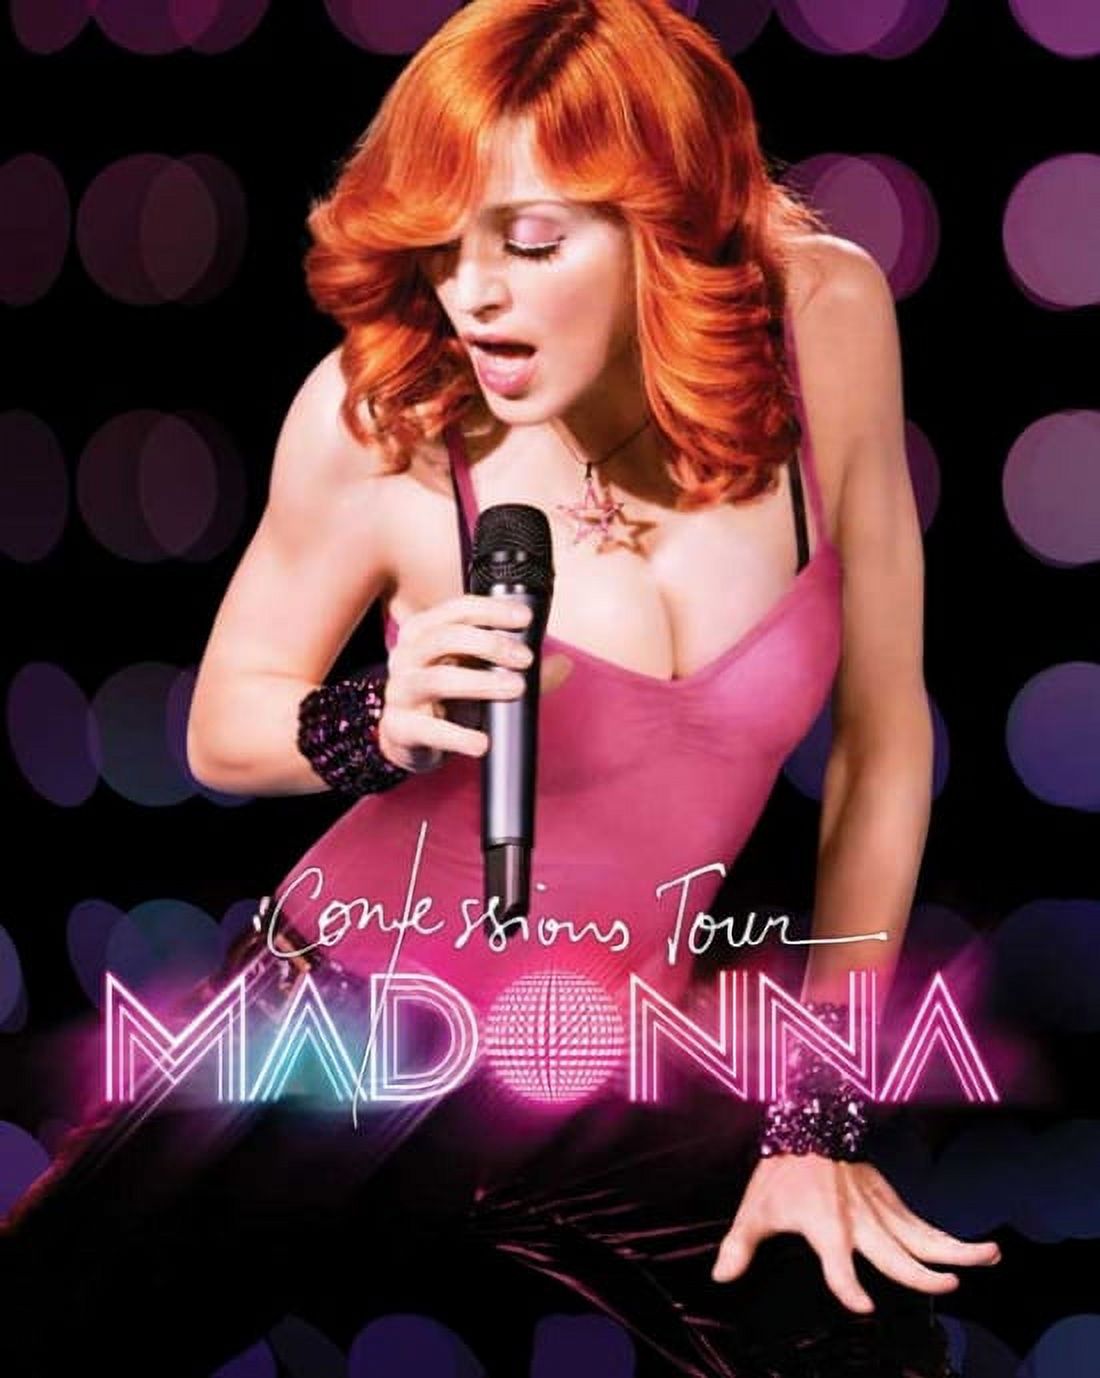 Madonna The Confessions Tour Live from London Movie Poster (11 x 17) - image 1 of 1